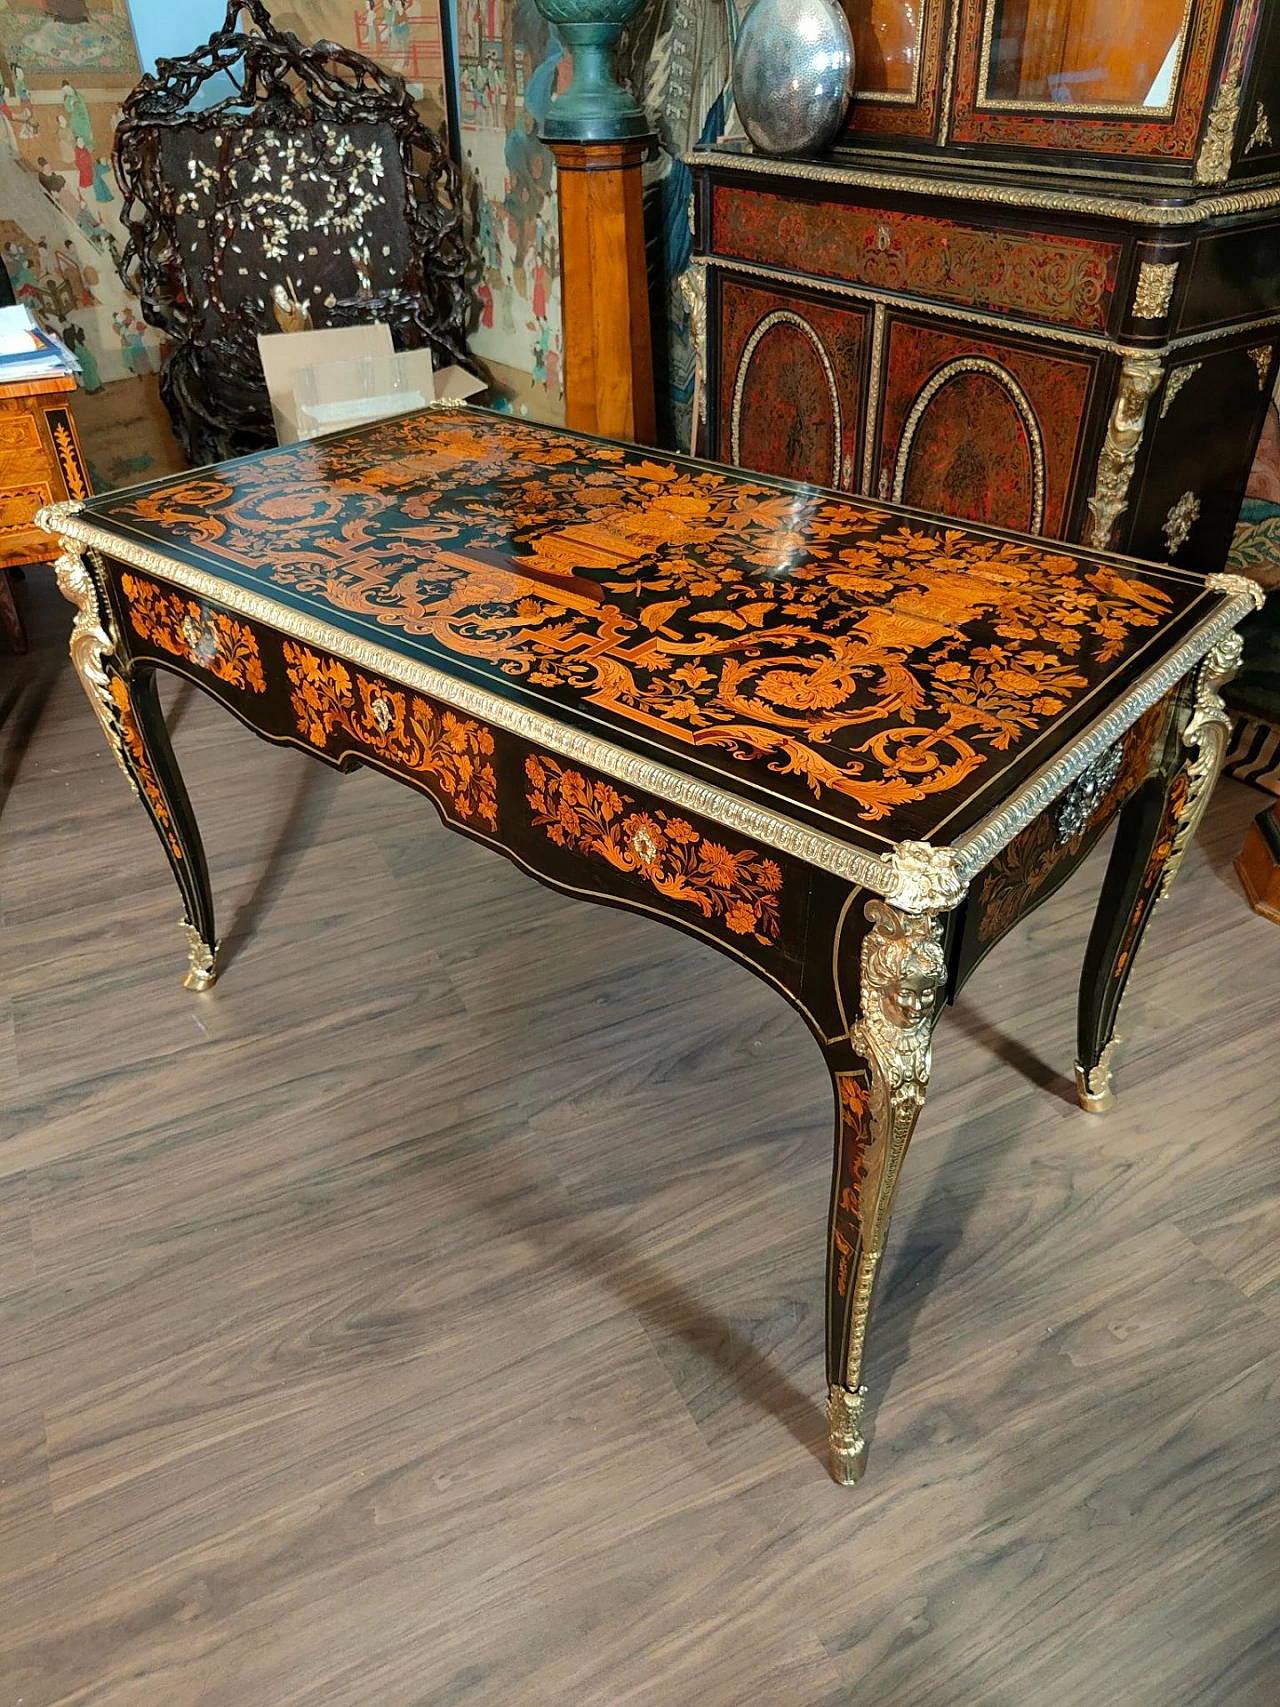 Inlaid desk with floral and animals depictions and applications in gilded bronze, 19th century 10